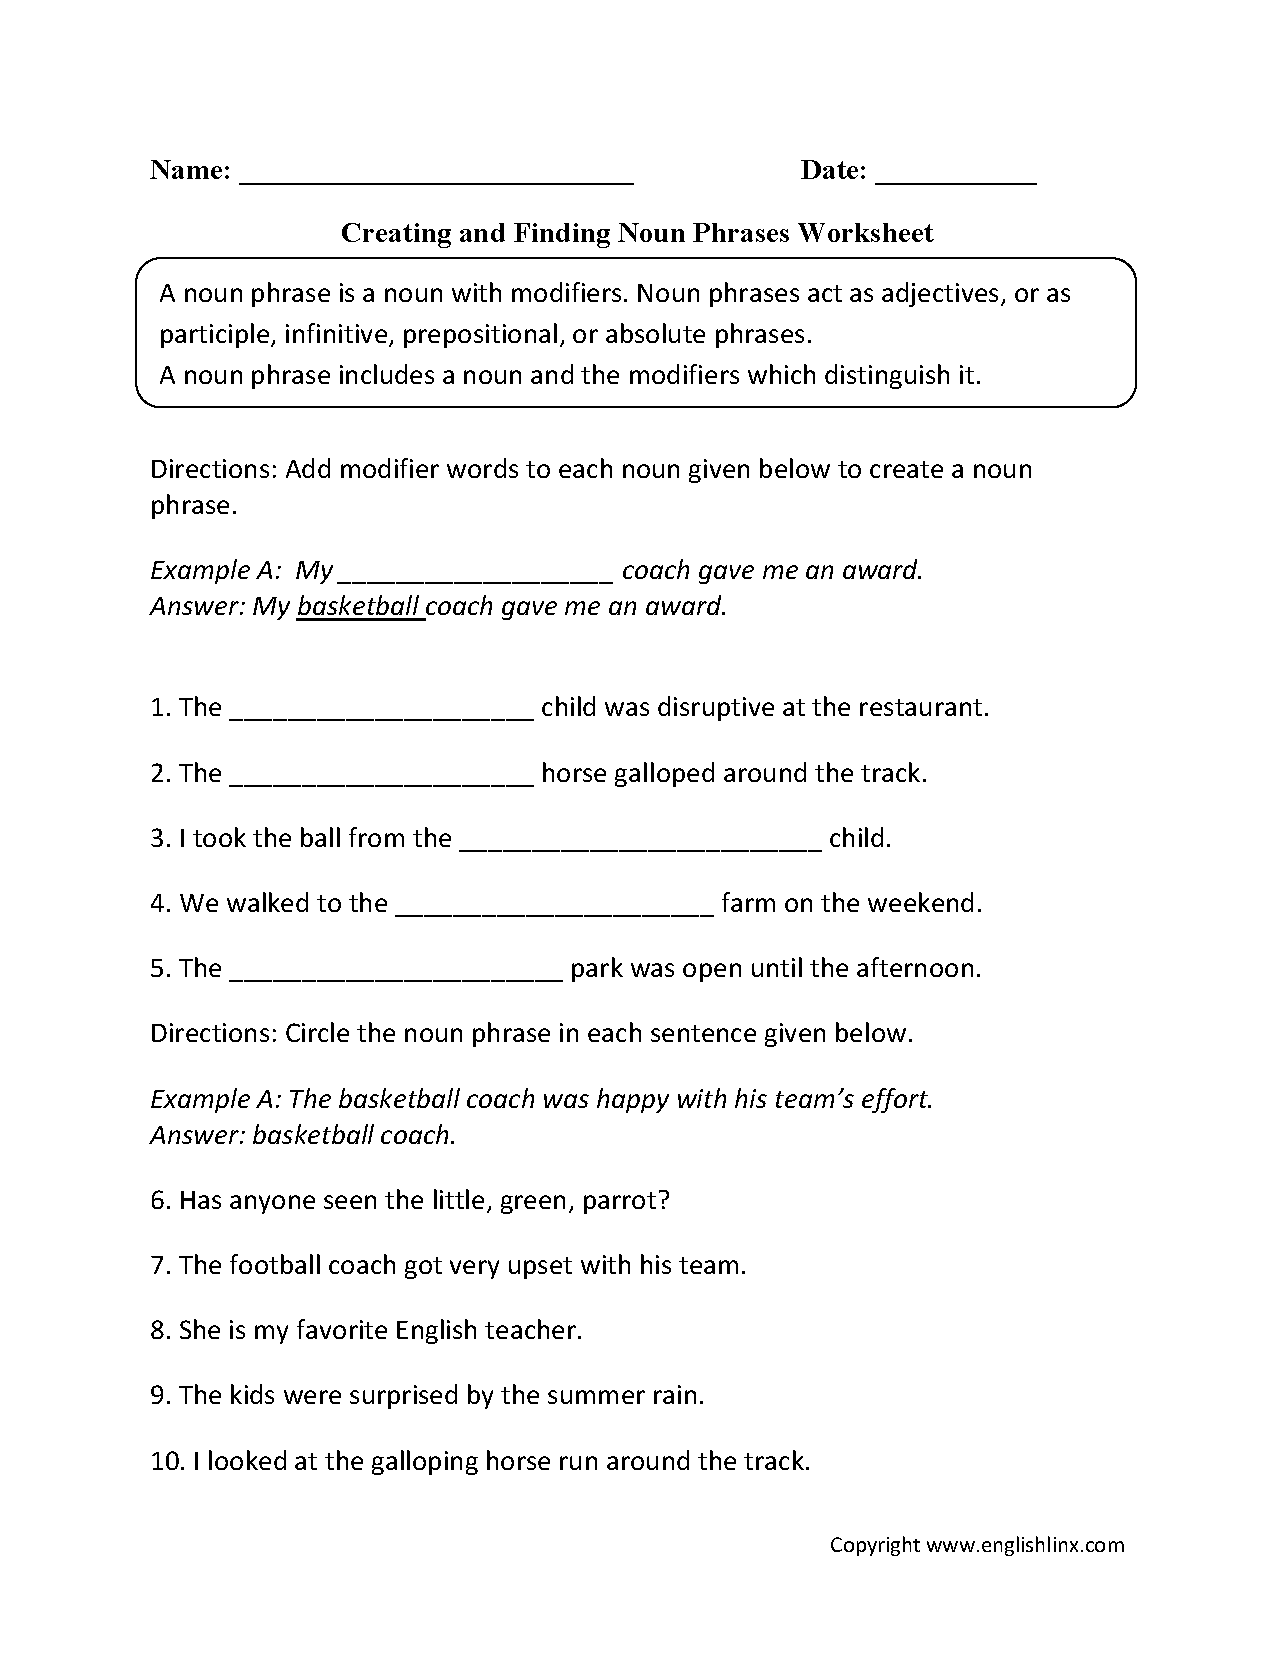 5-best-images-of-funny-shakespeare-worksheets-romeo-and-juliet-character-map-worksheet-funny